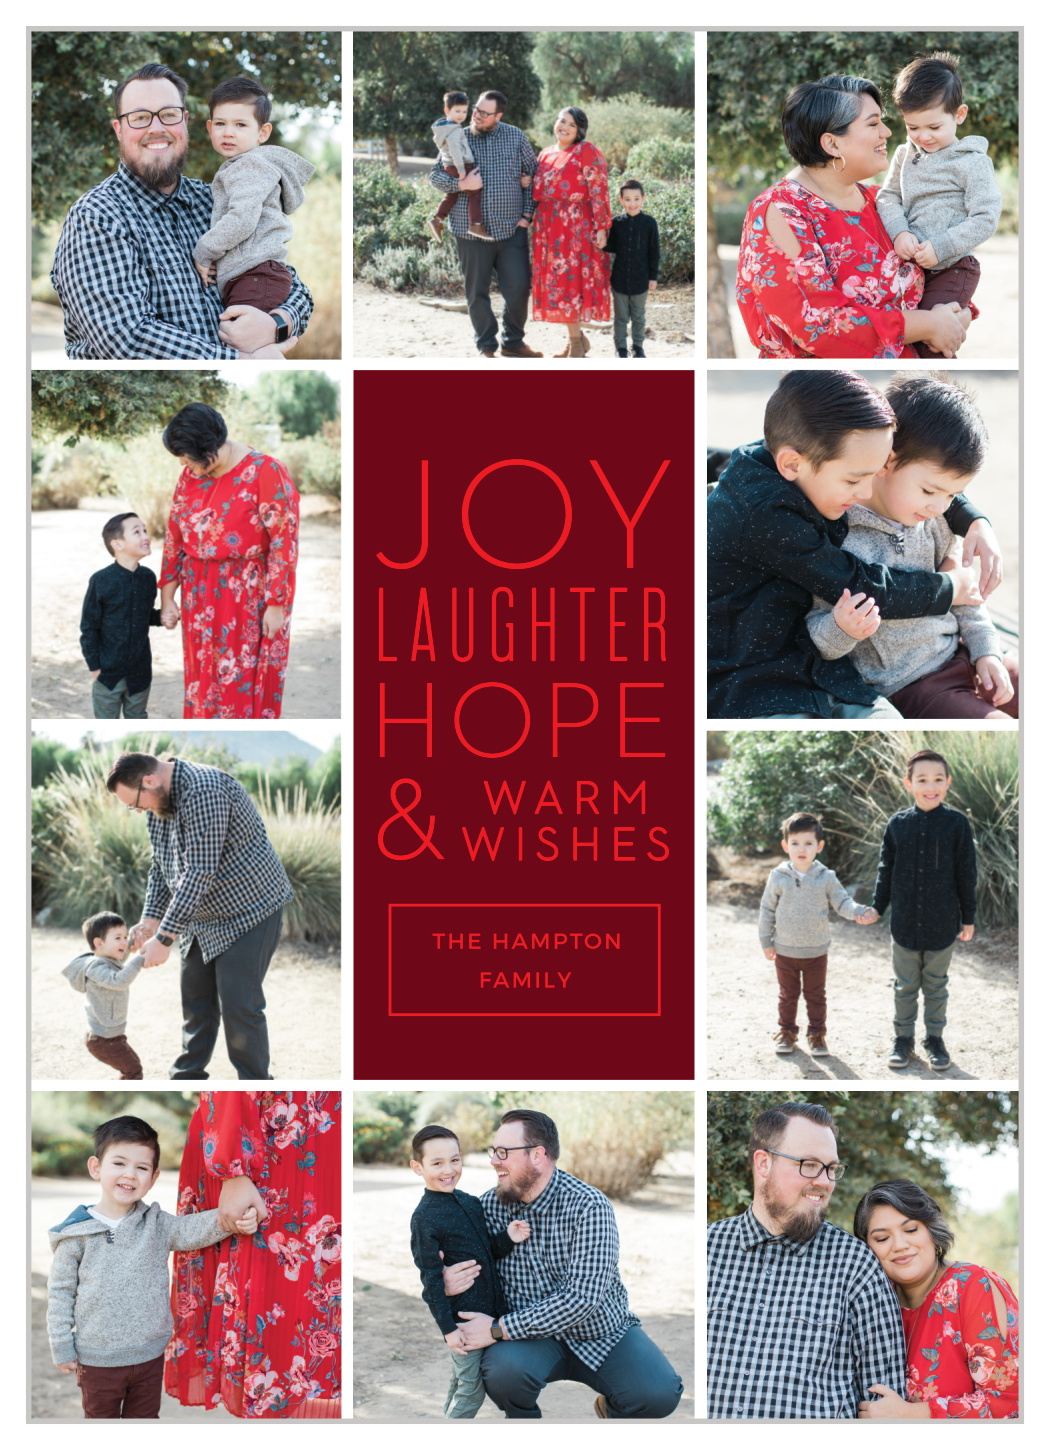 Joy & Laughter Holiday Cards